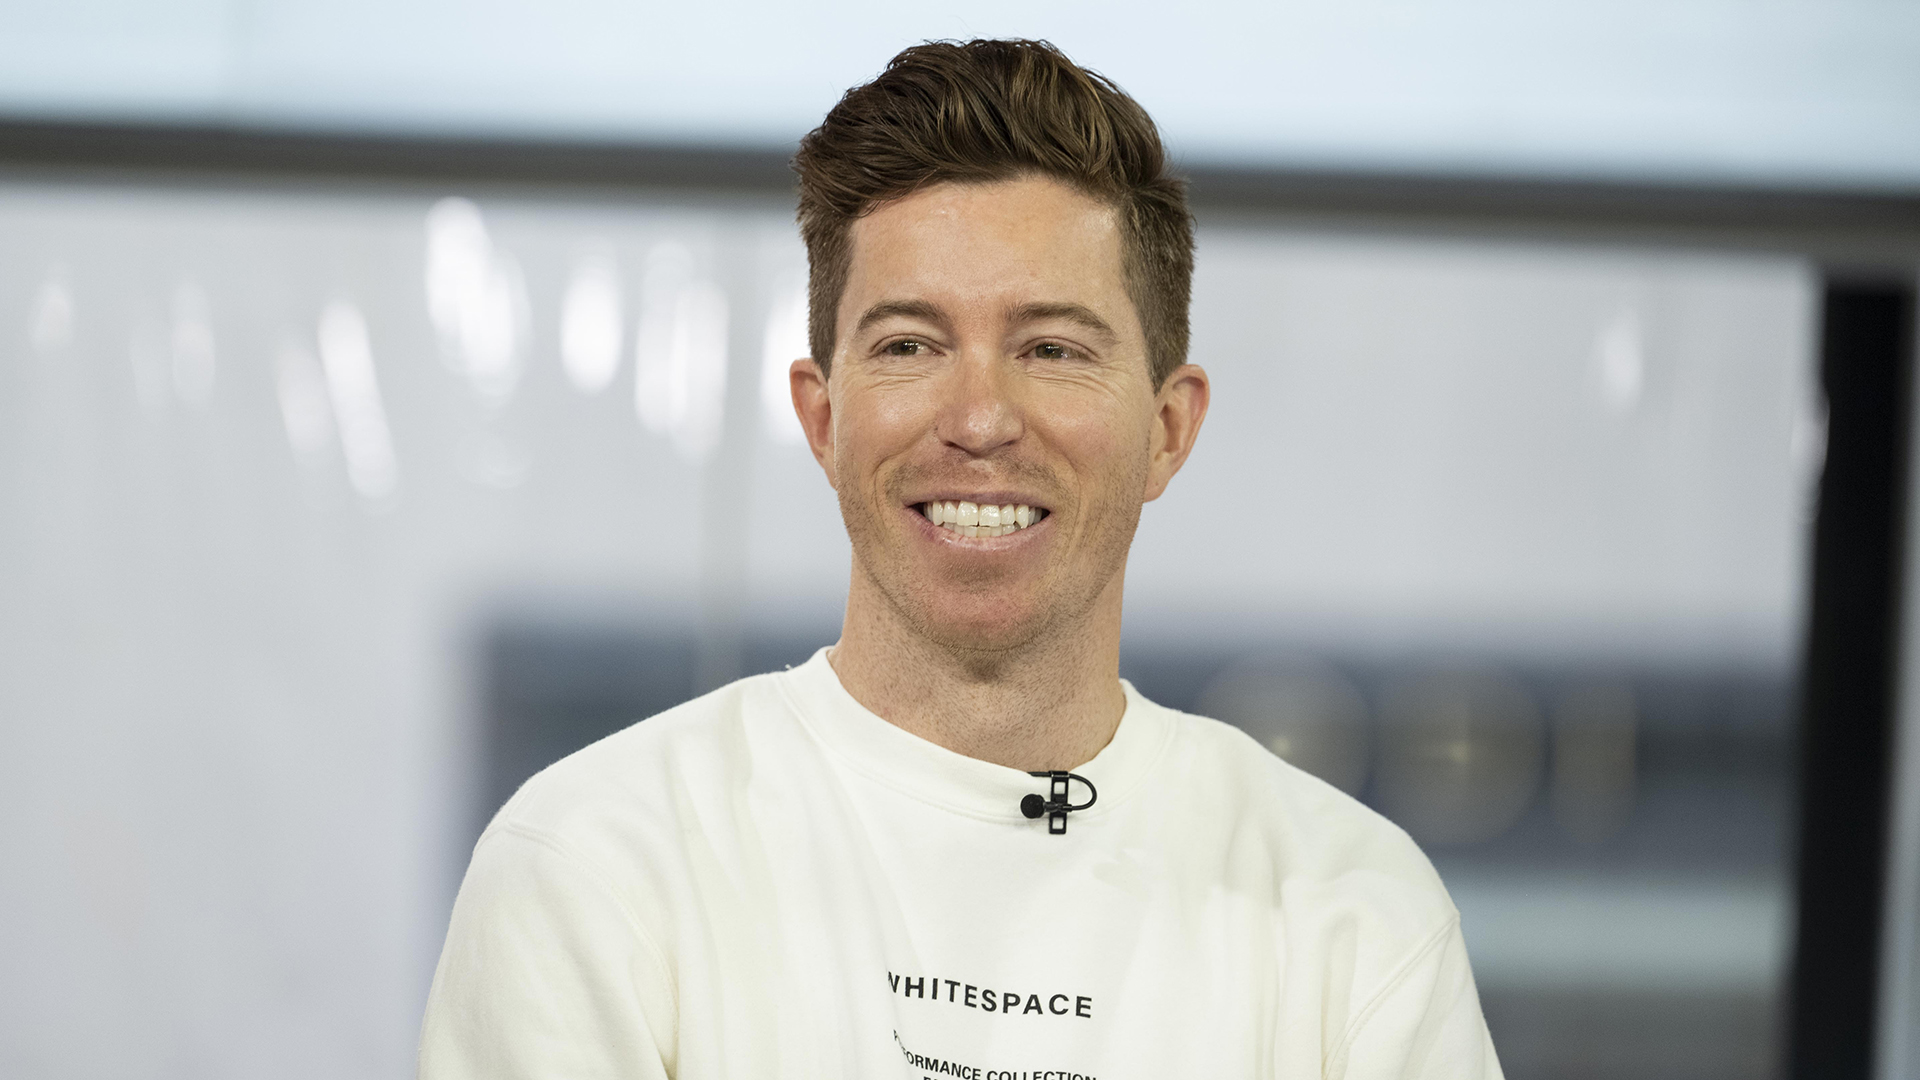 Shaun White's Next Move May Be Trying Hollywood - The New York Times